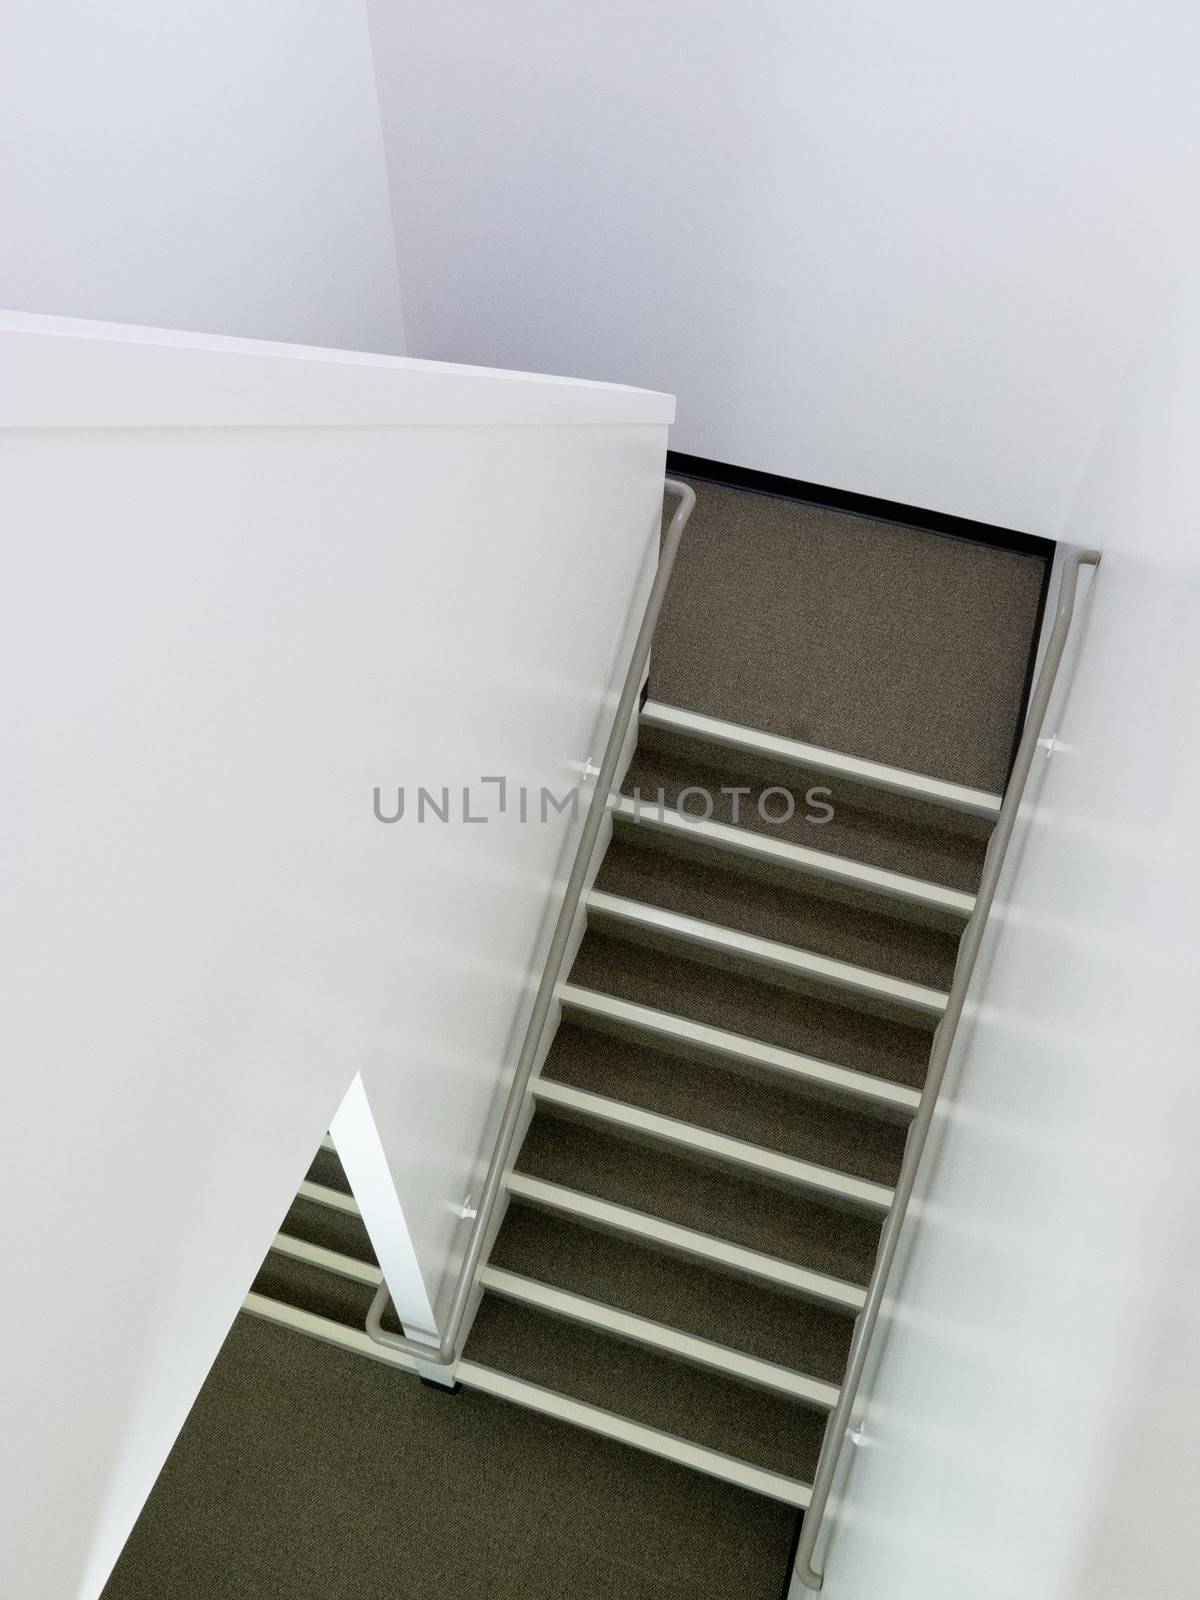 Staircase inside building architecture abstract by PiLens